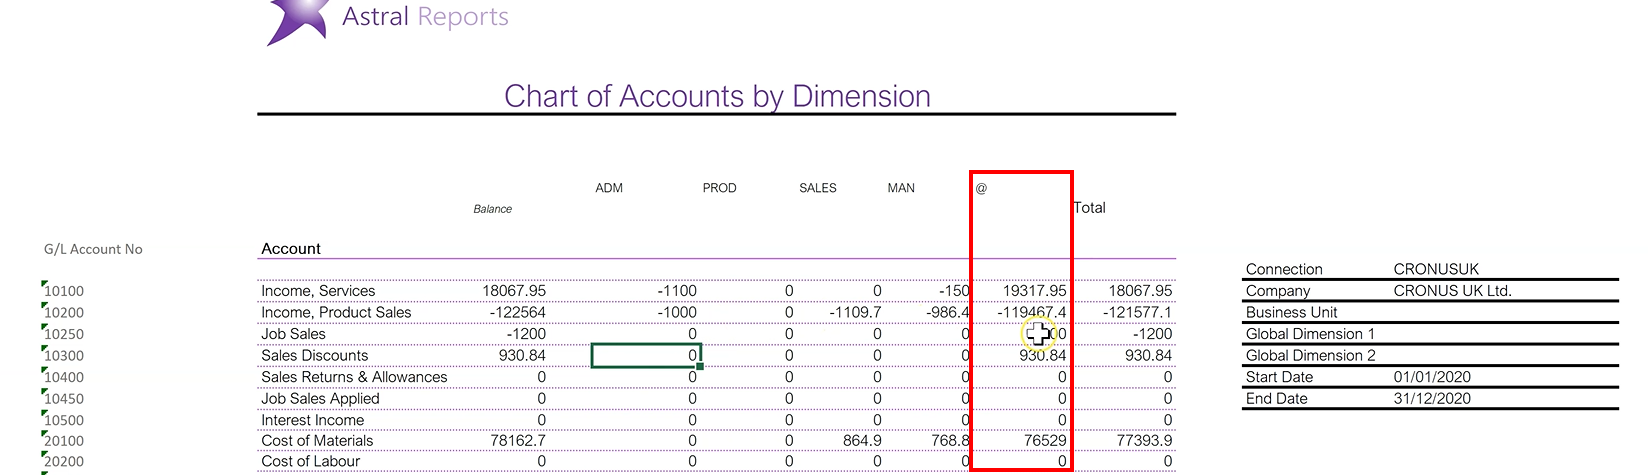 Astral Reports Chart of Accounts with Dimensions Figure 1.img